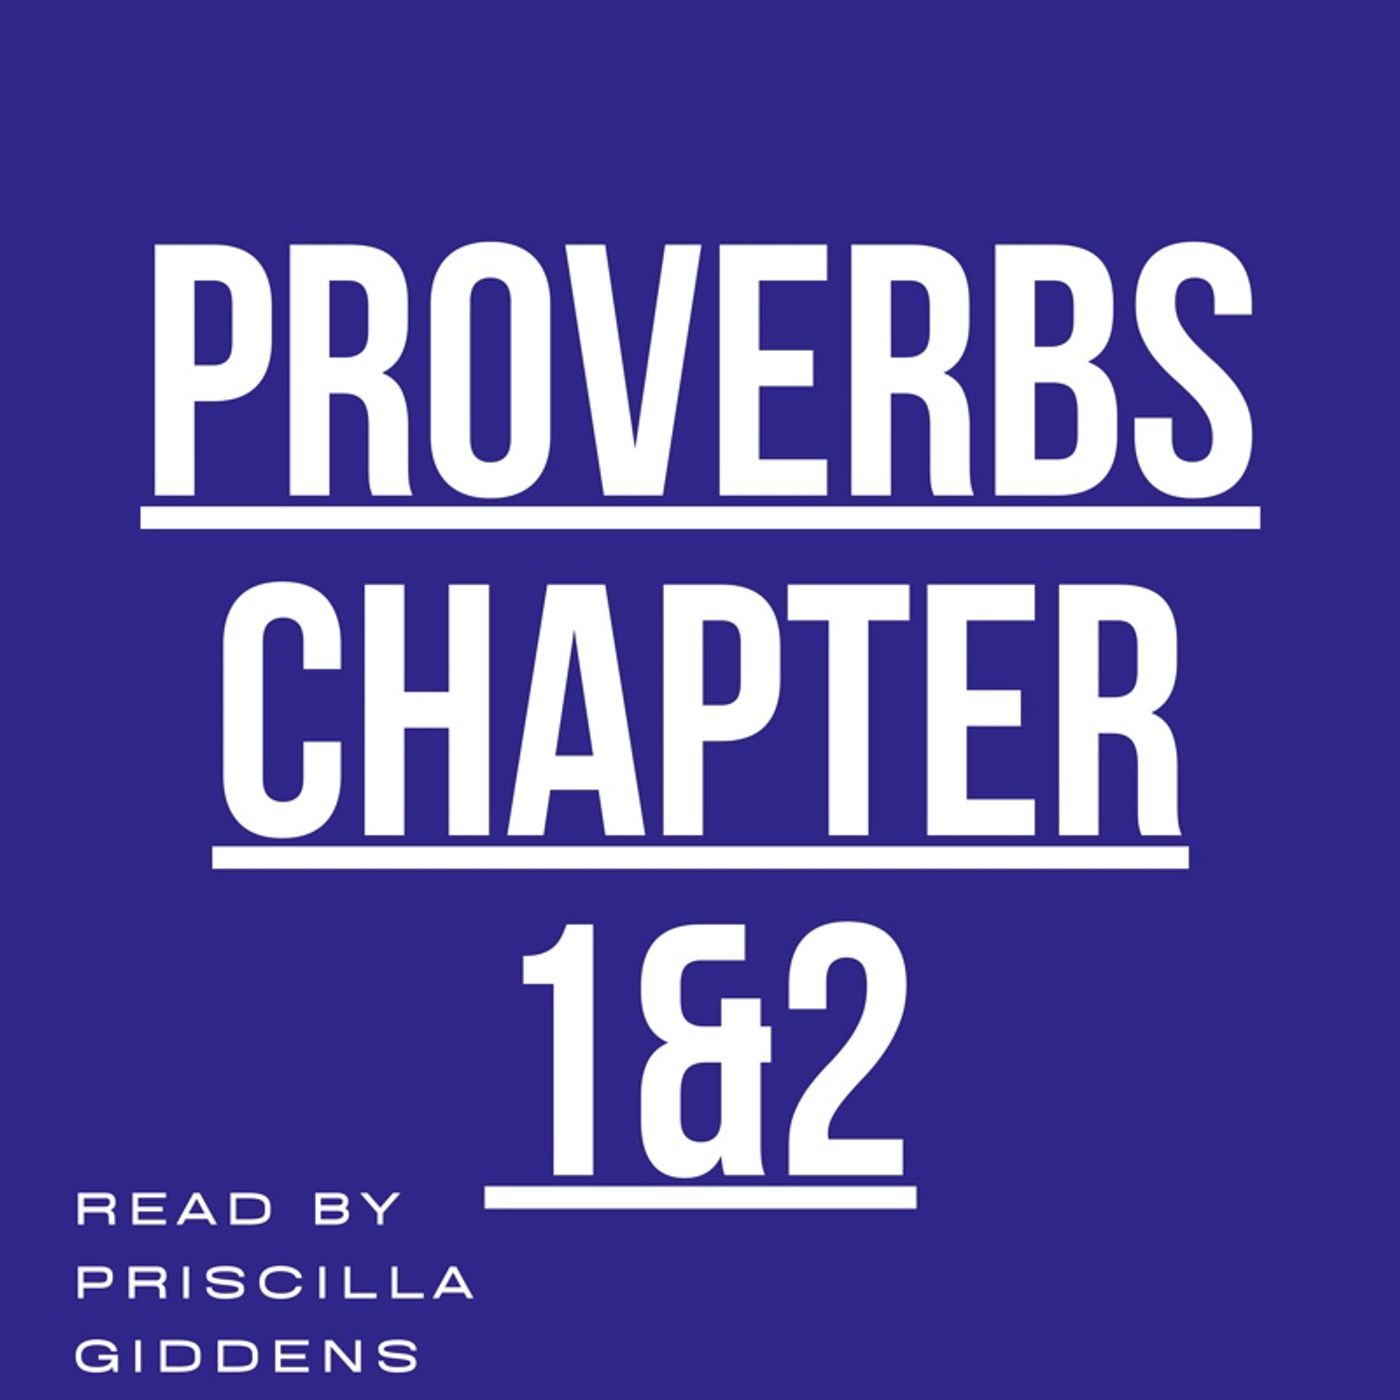 Proverbs Chapters 1-2 read by Priscilla Giddens